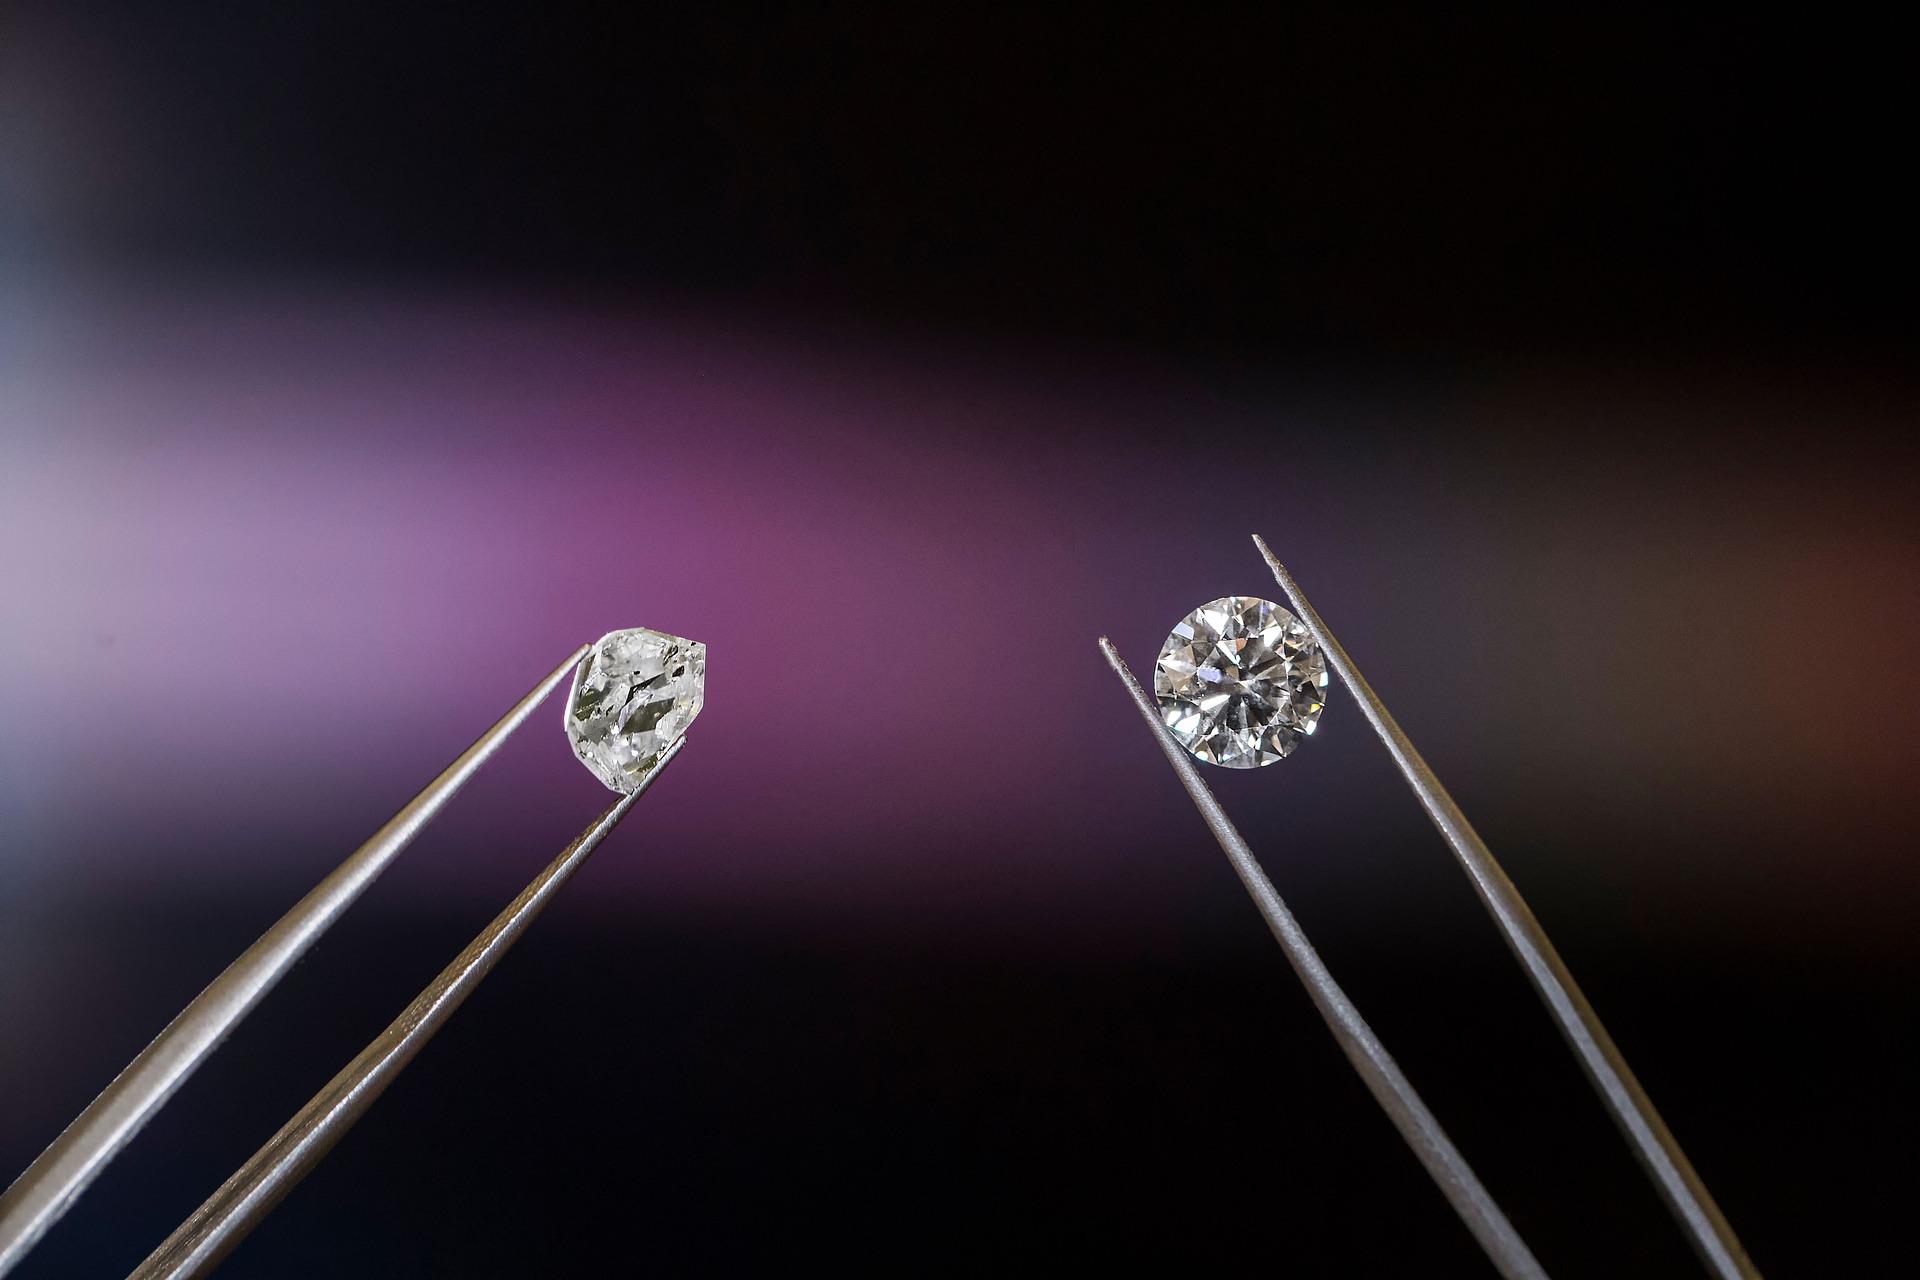 Diamonds made from carbon dioxide may indicate a new trend in the jewelery trade